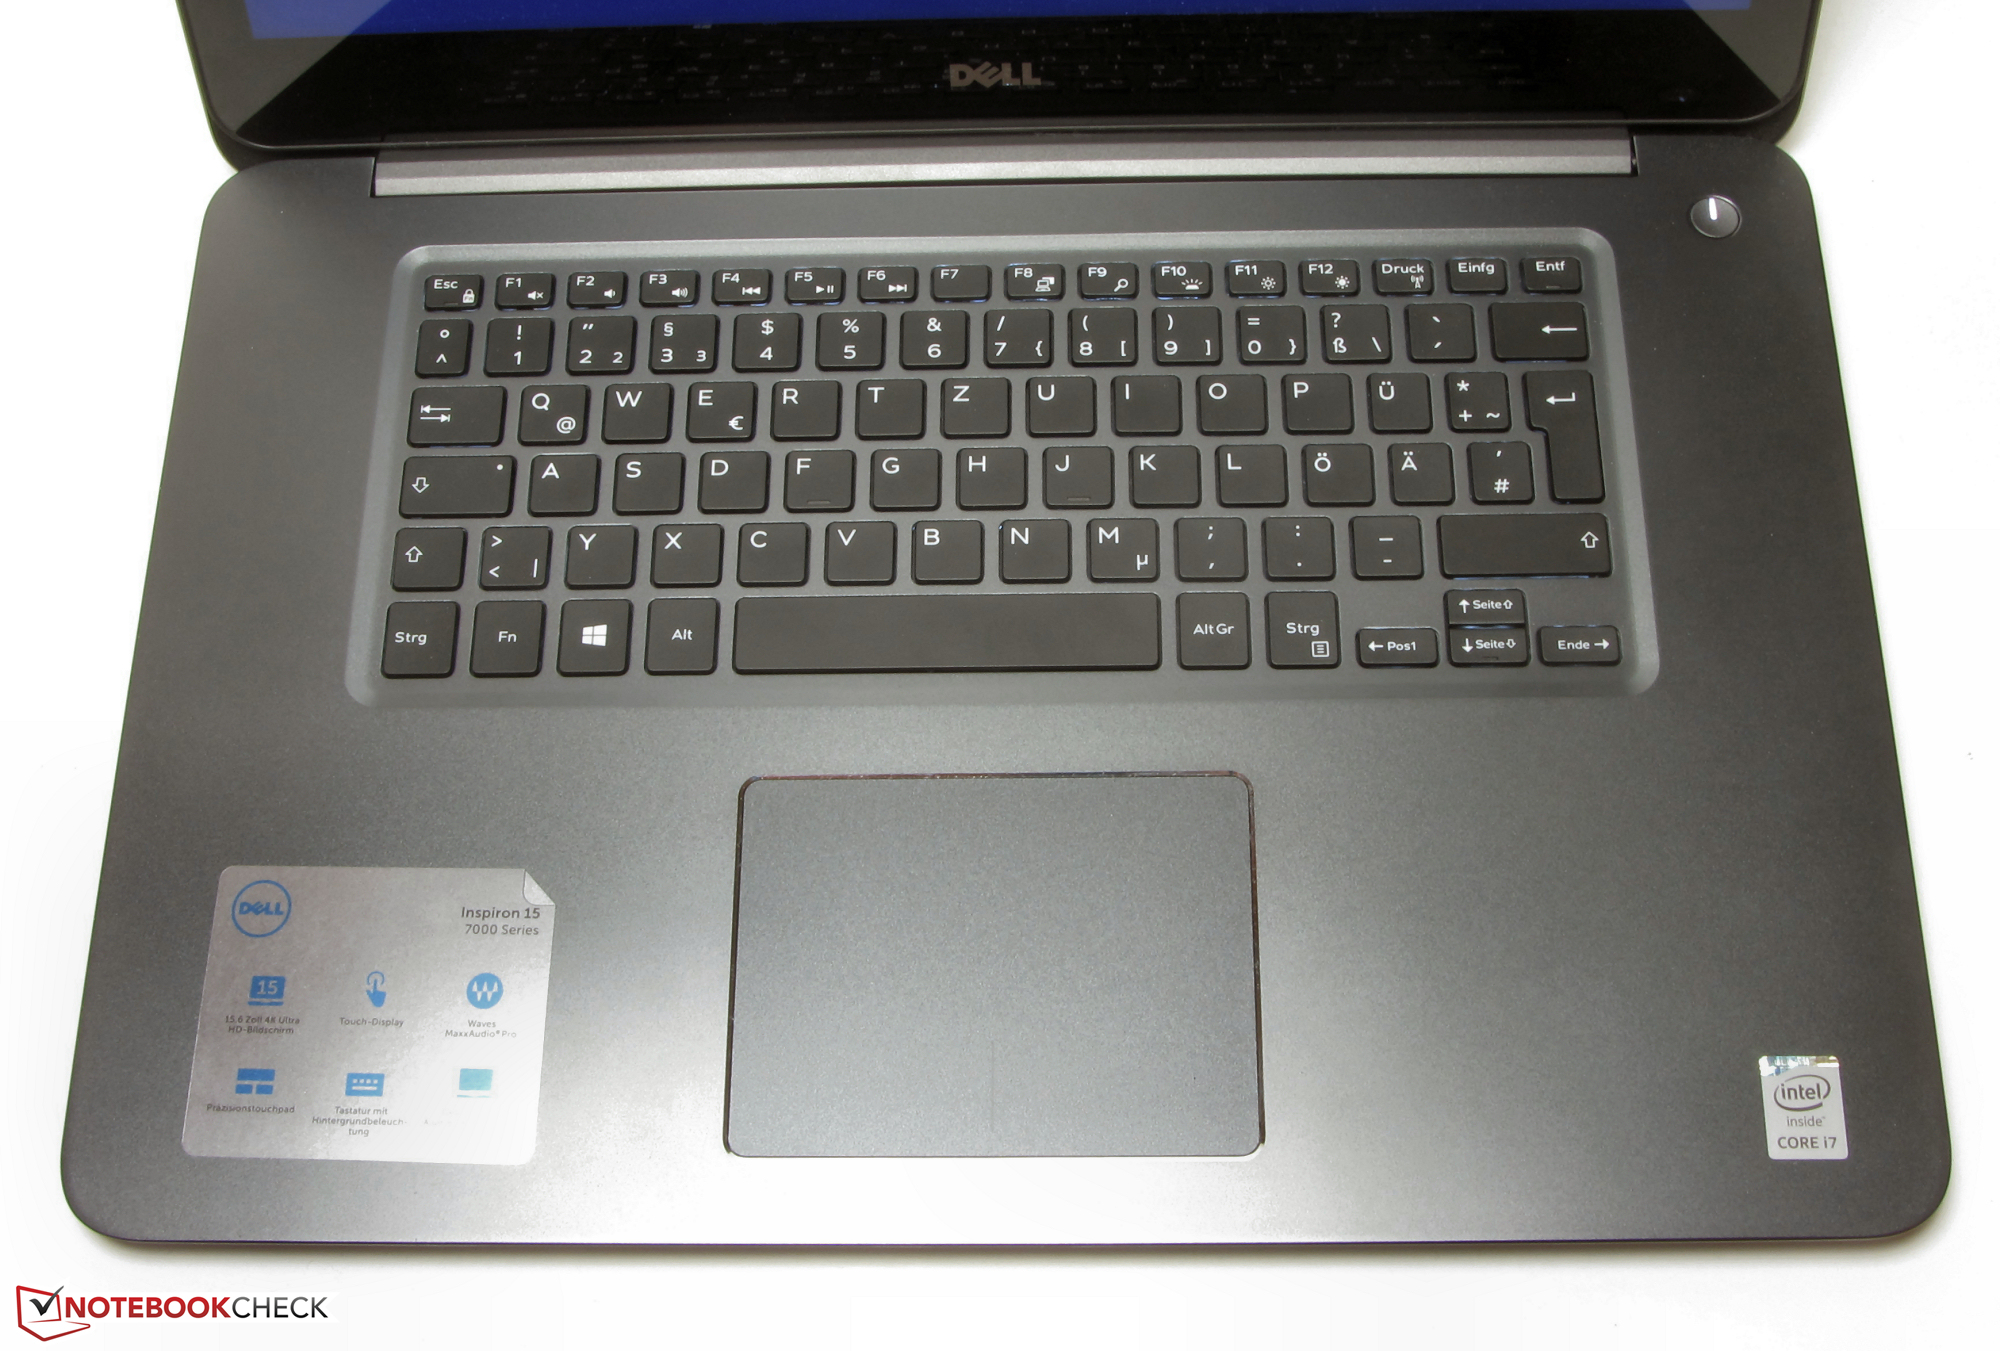 Dell Inspiron 15-7548 Notebook Review - NotebookCheck.net Reviews